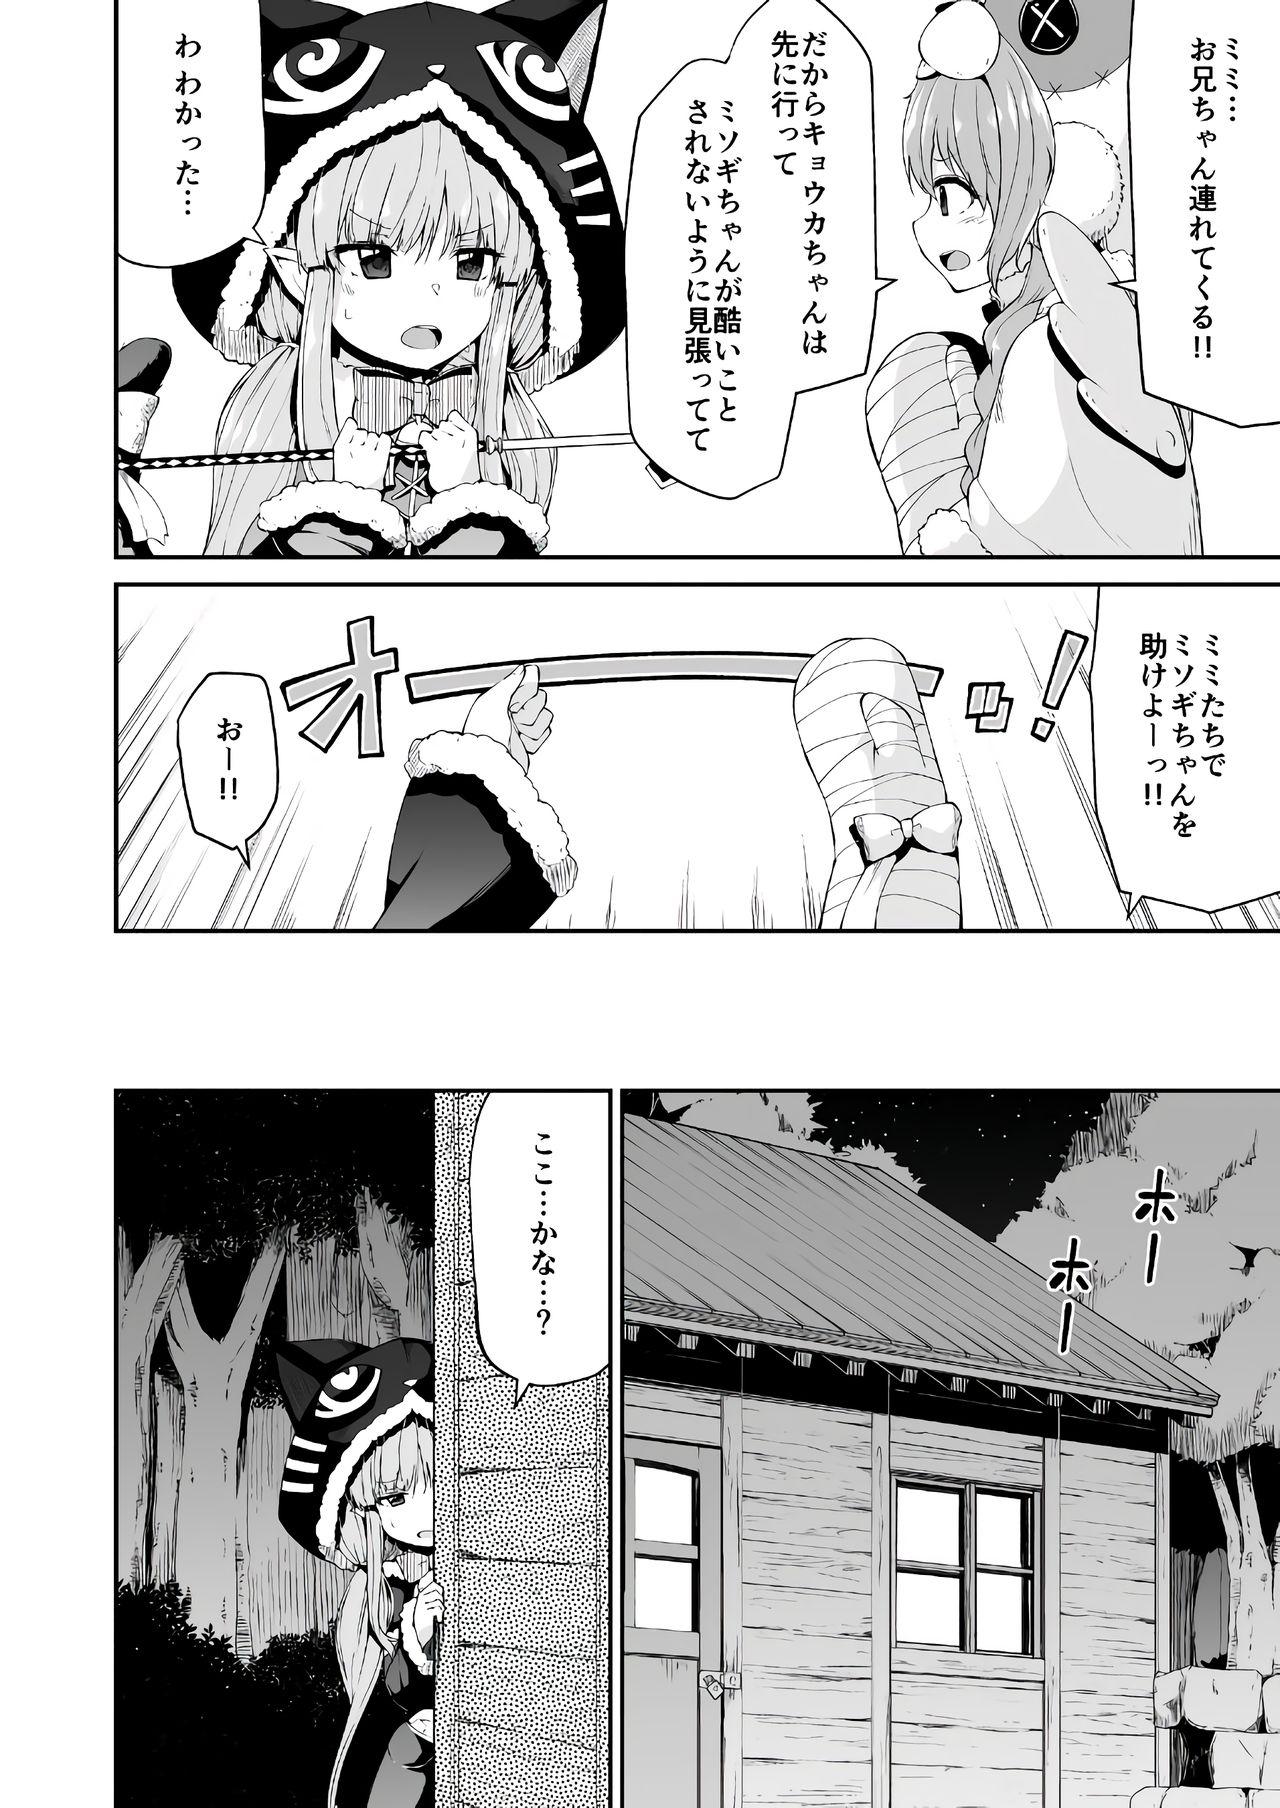 Lovers Kyouka-chan to Okashi Party - Princess connect Gostoso - Page 3